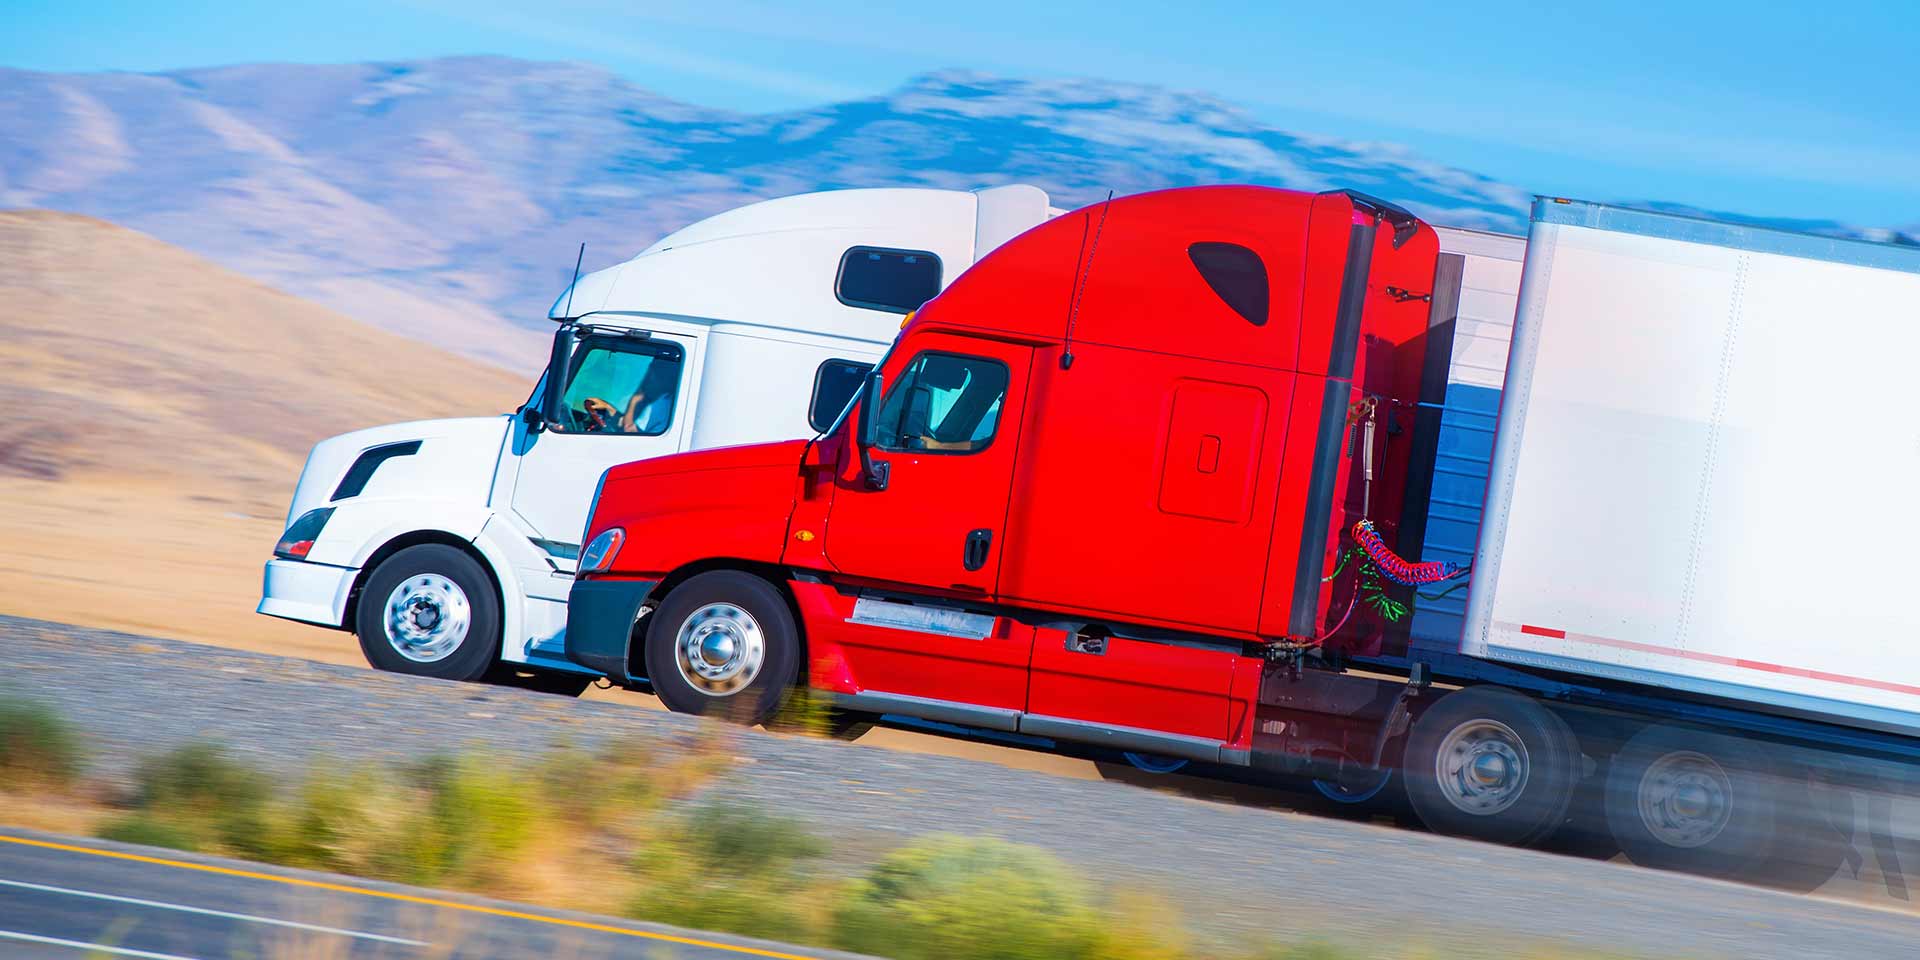 Detroit Trucking Services, Trucking Company and Freight Forwarding Services